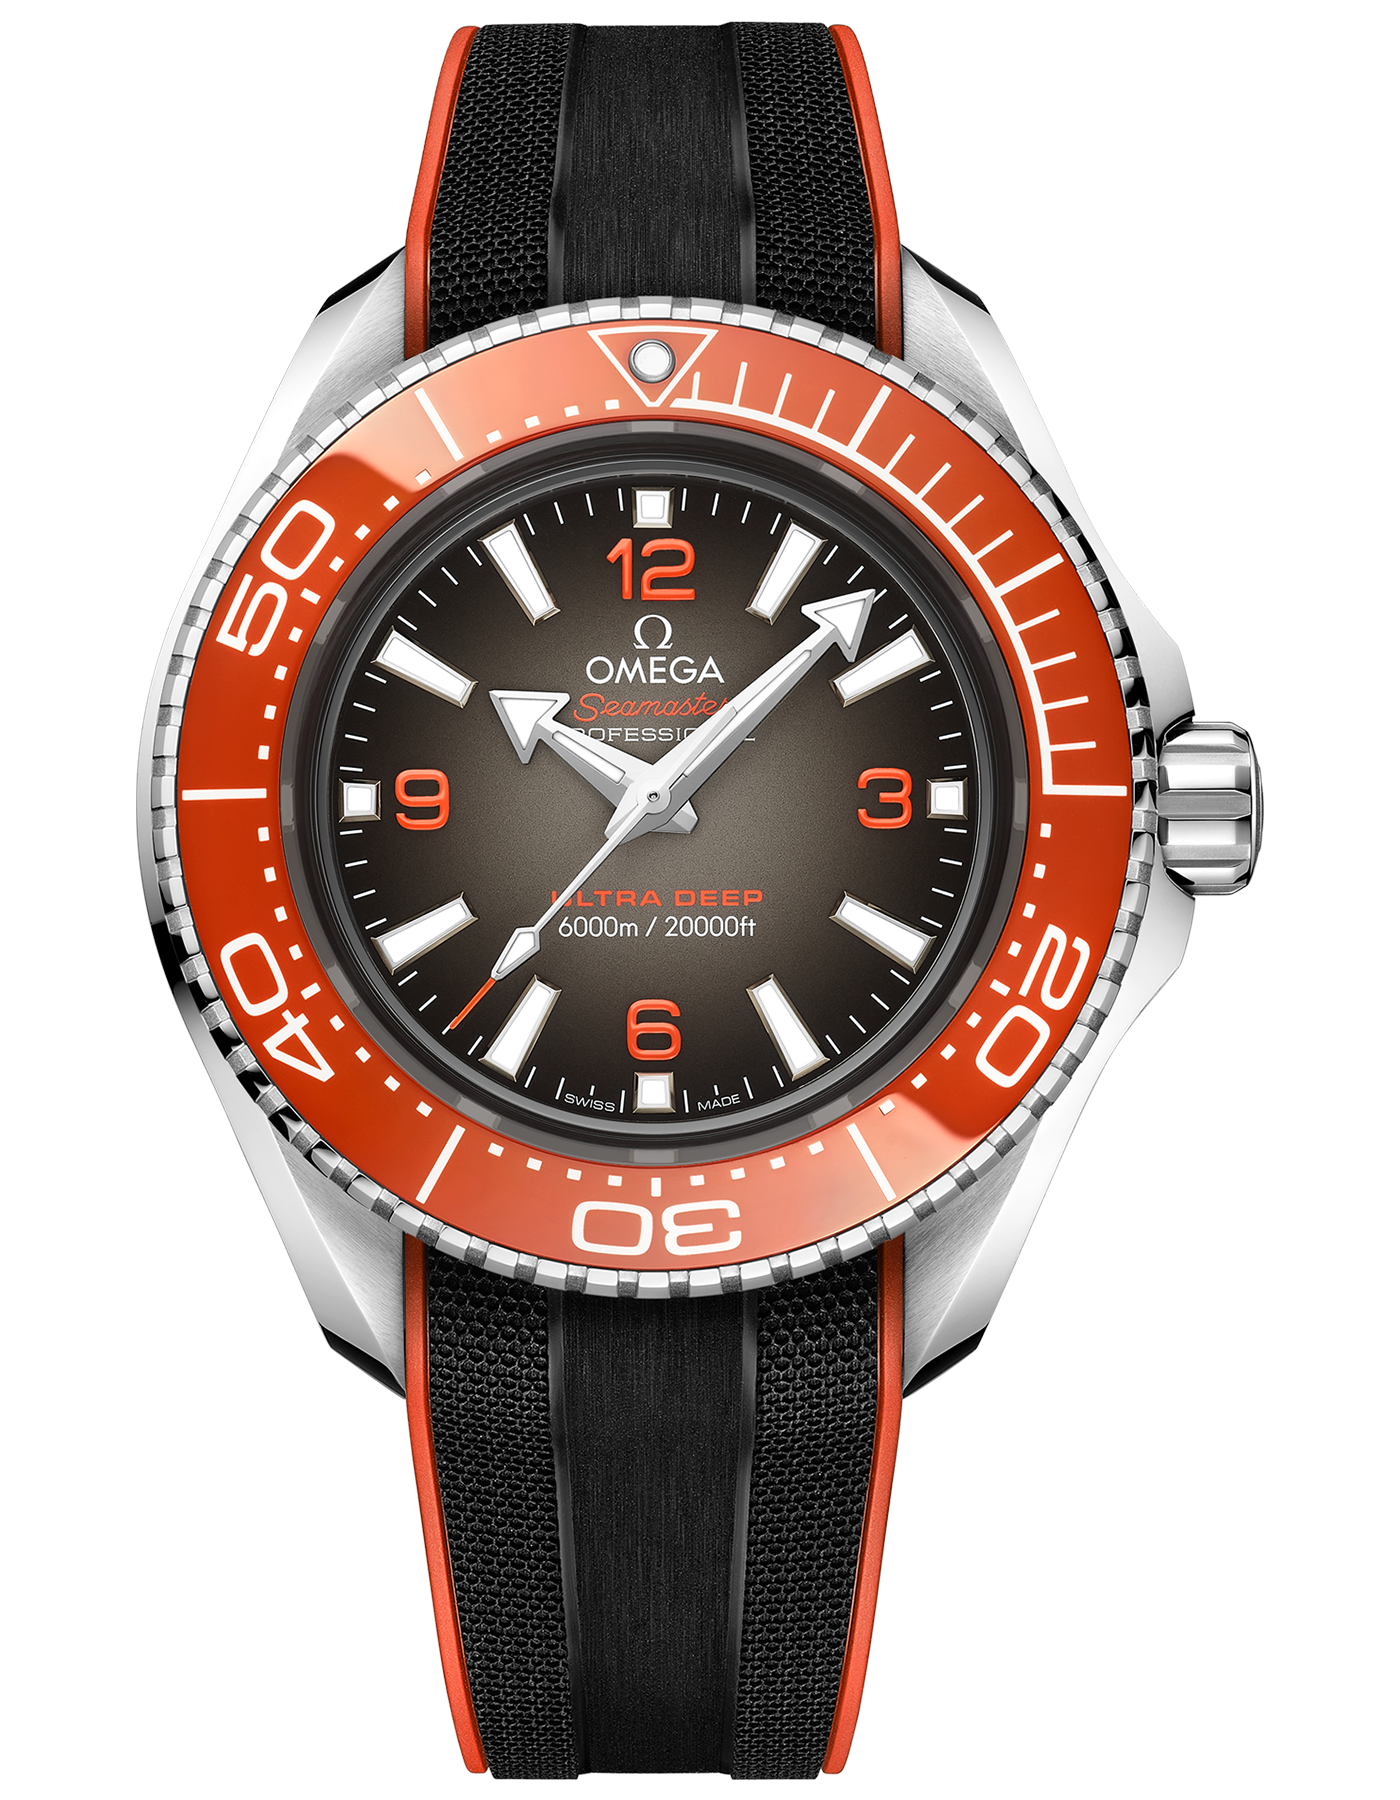 SEAMASTER PLANET OCEAN 6000M CO‑AXIAL MASTER CHRONOMETER 45.5 MM "ULTRA DEEP"